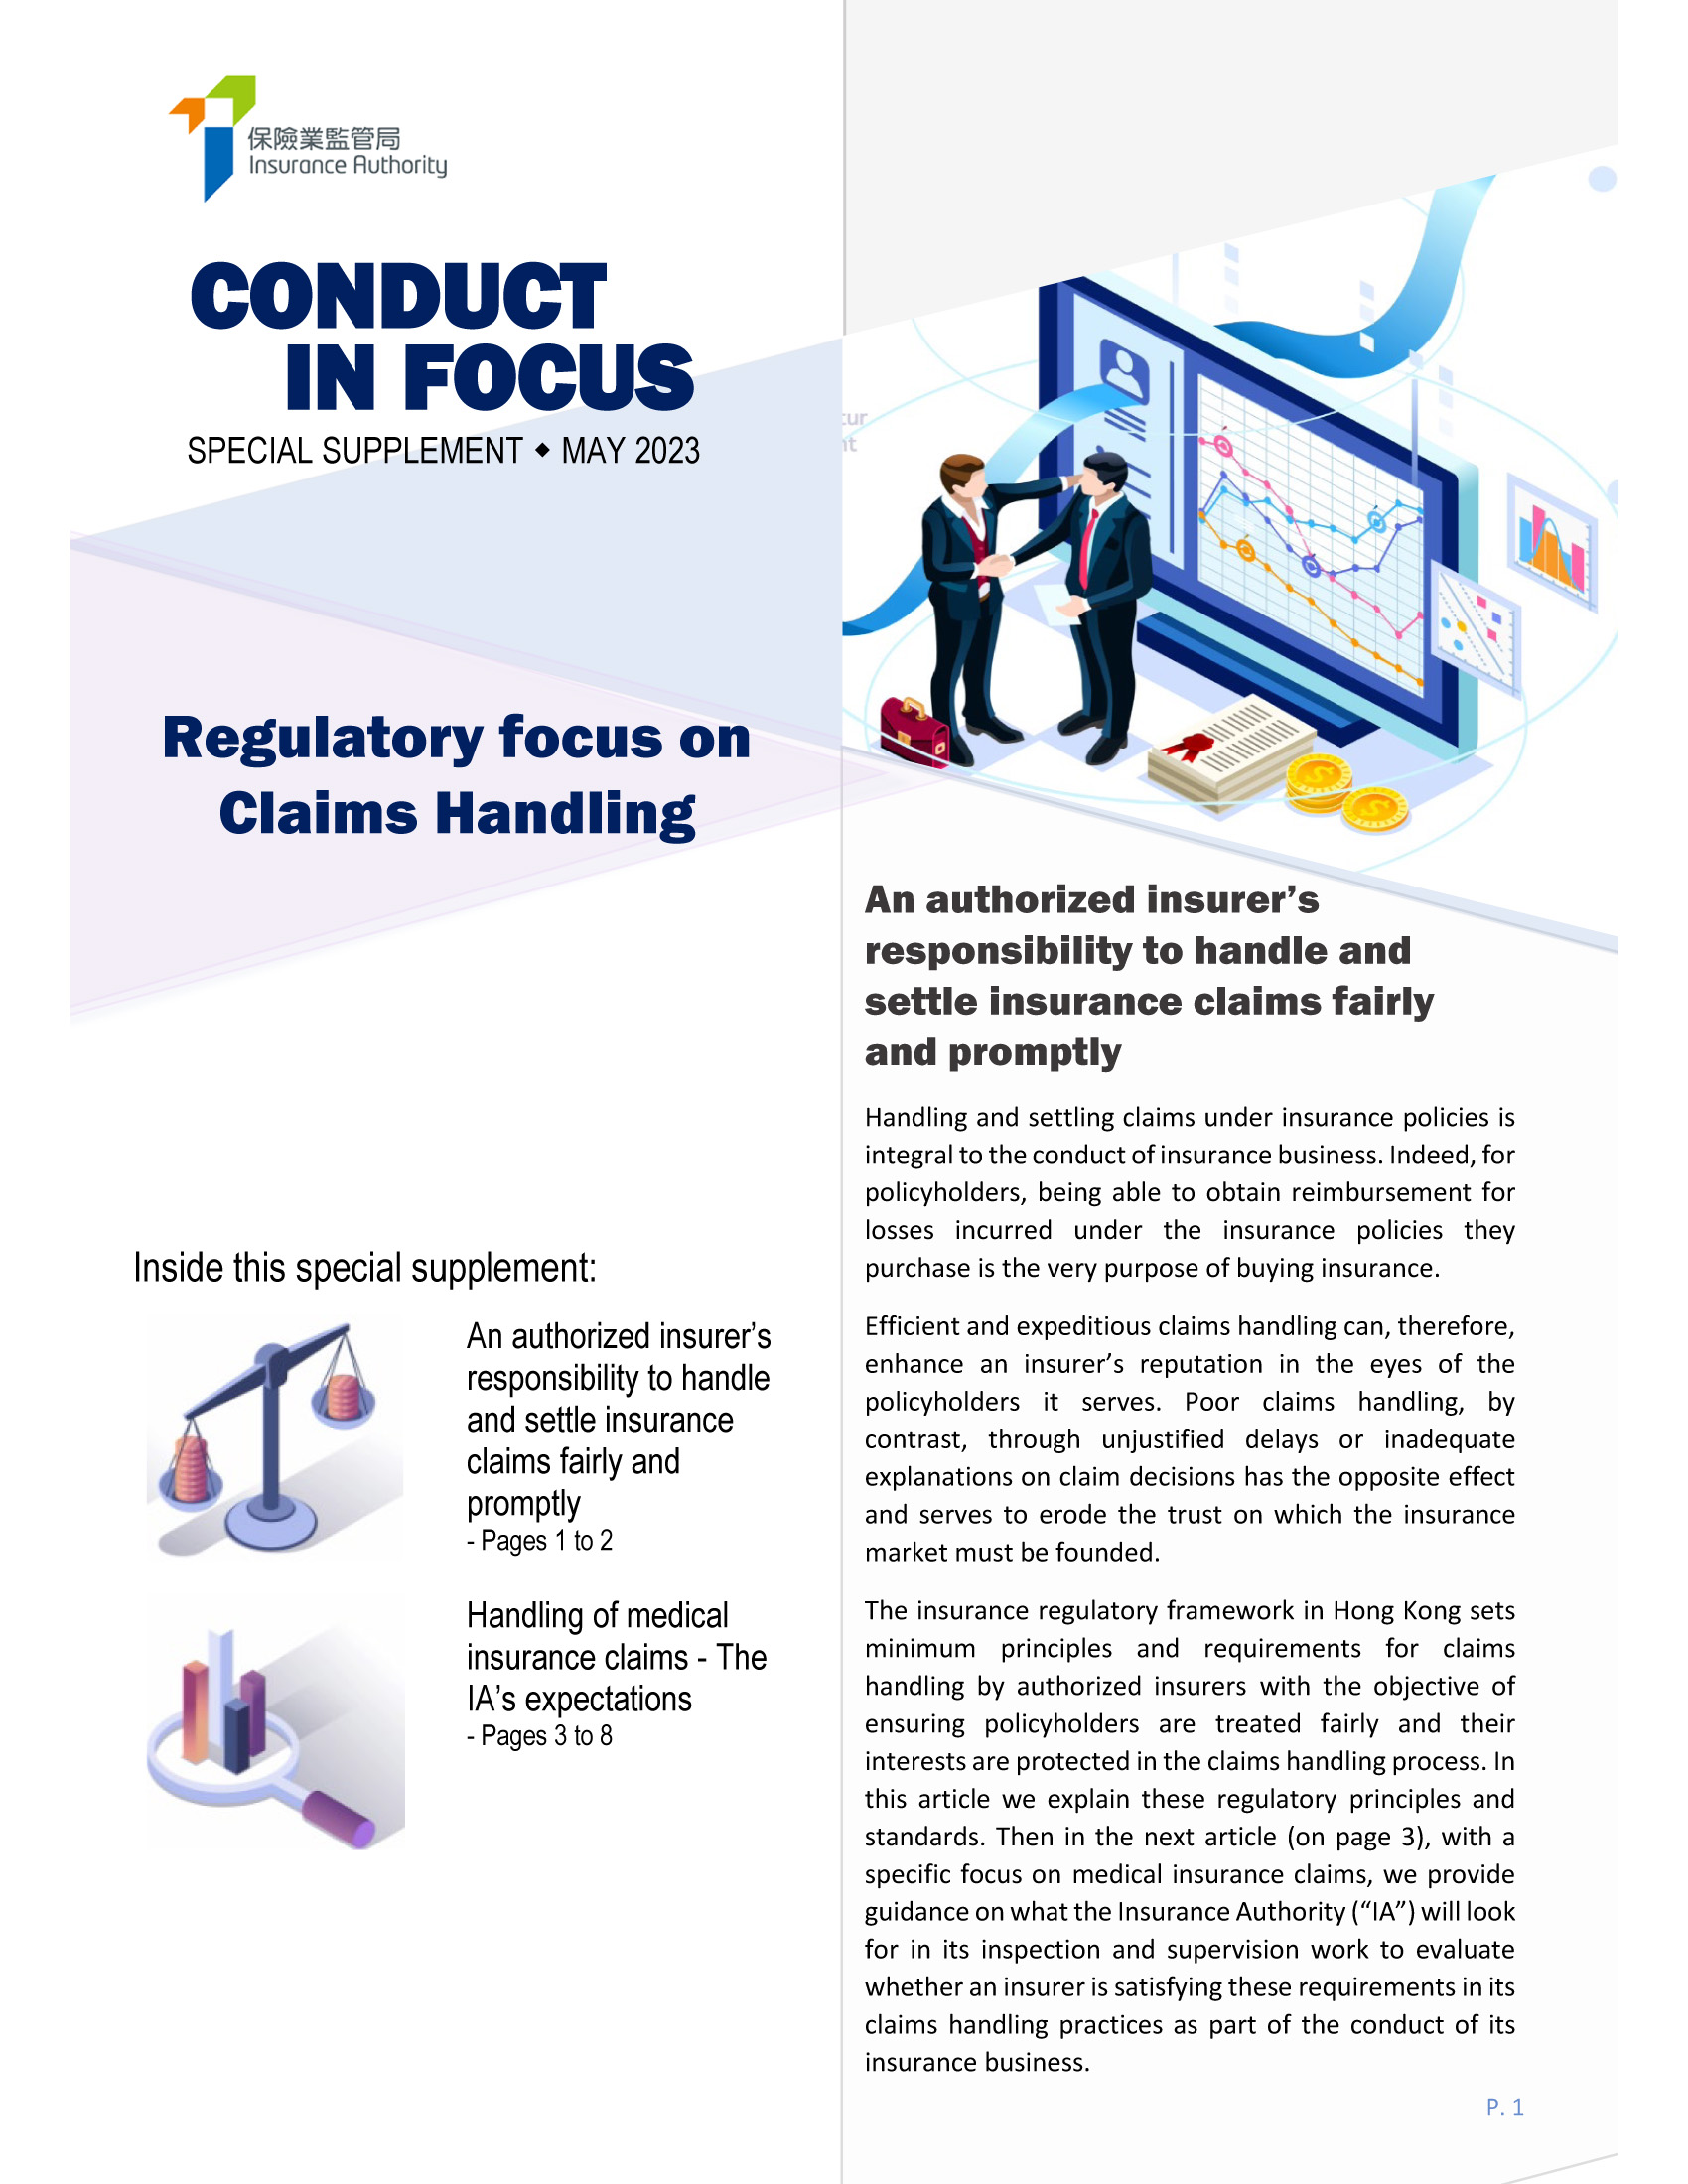 Conduct in Focus, Issue 7 - Special Supplement 